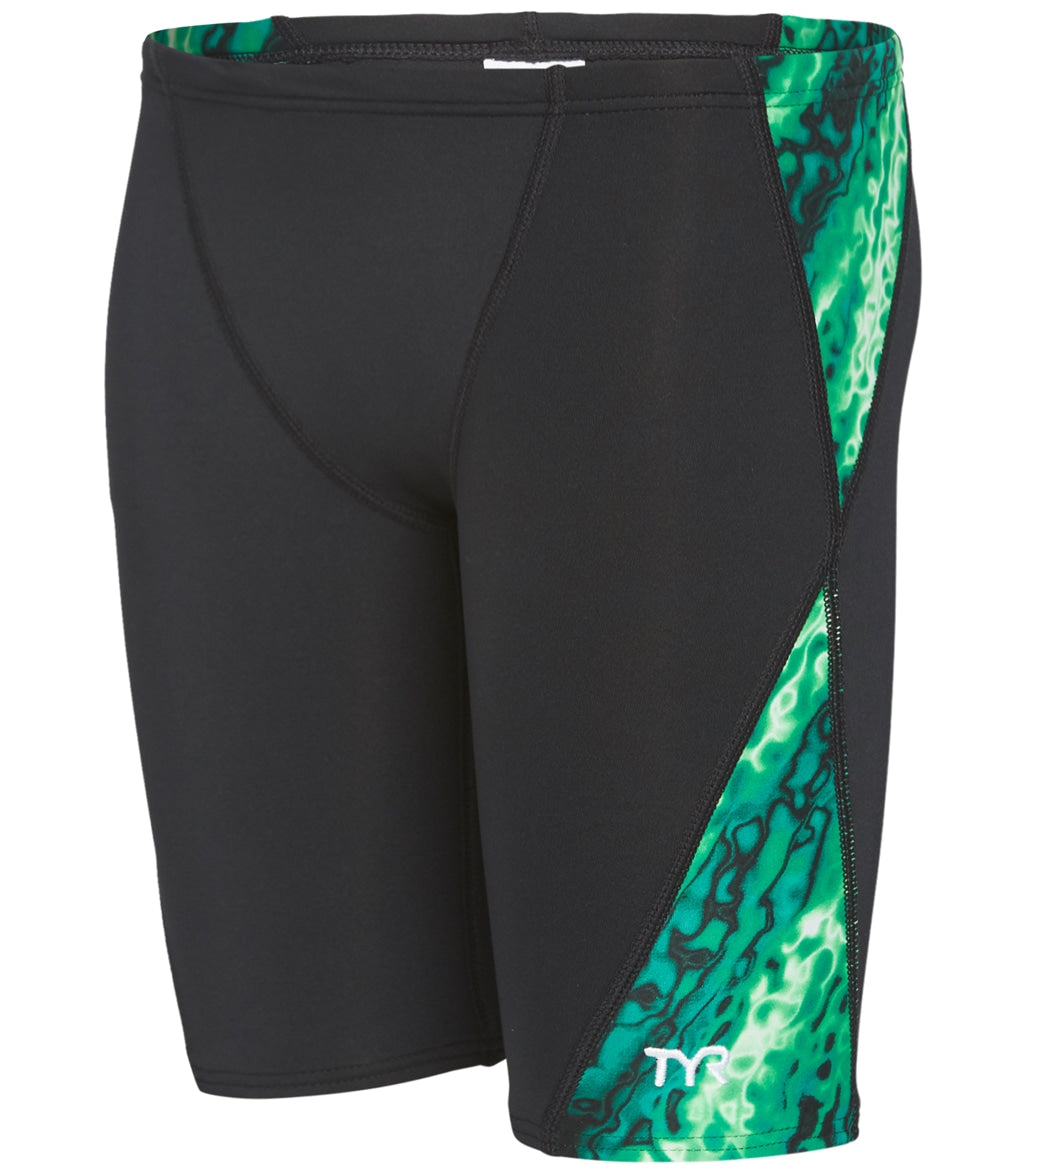 TYR Boys' Pytha Blade Splice Jammer Swimsuit at SwimOutlet.com